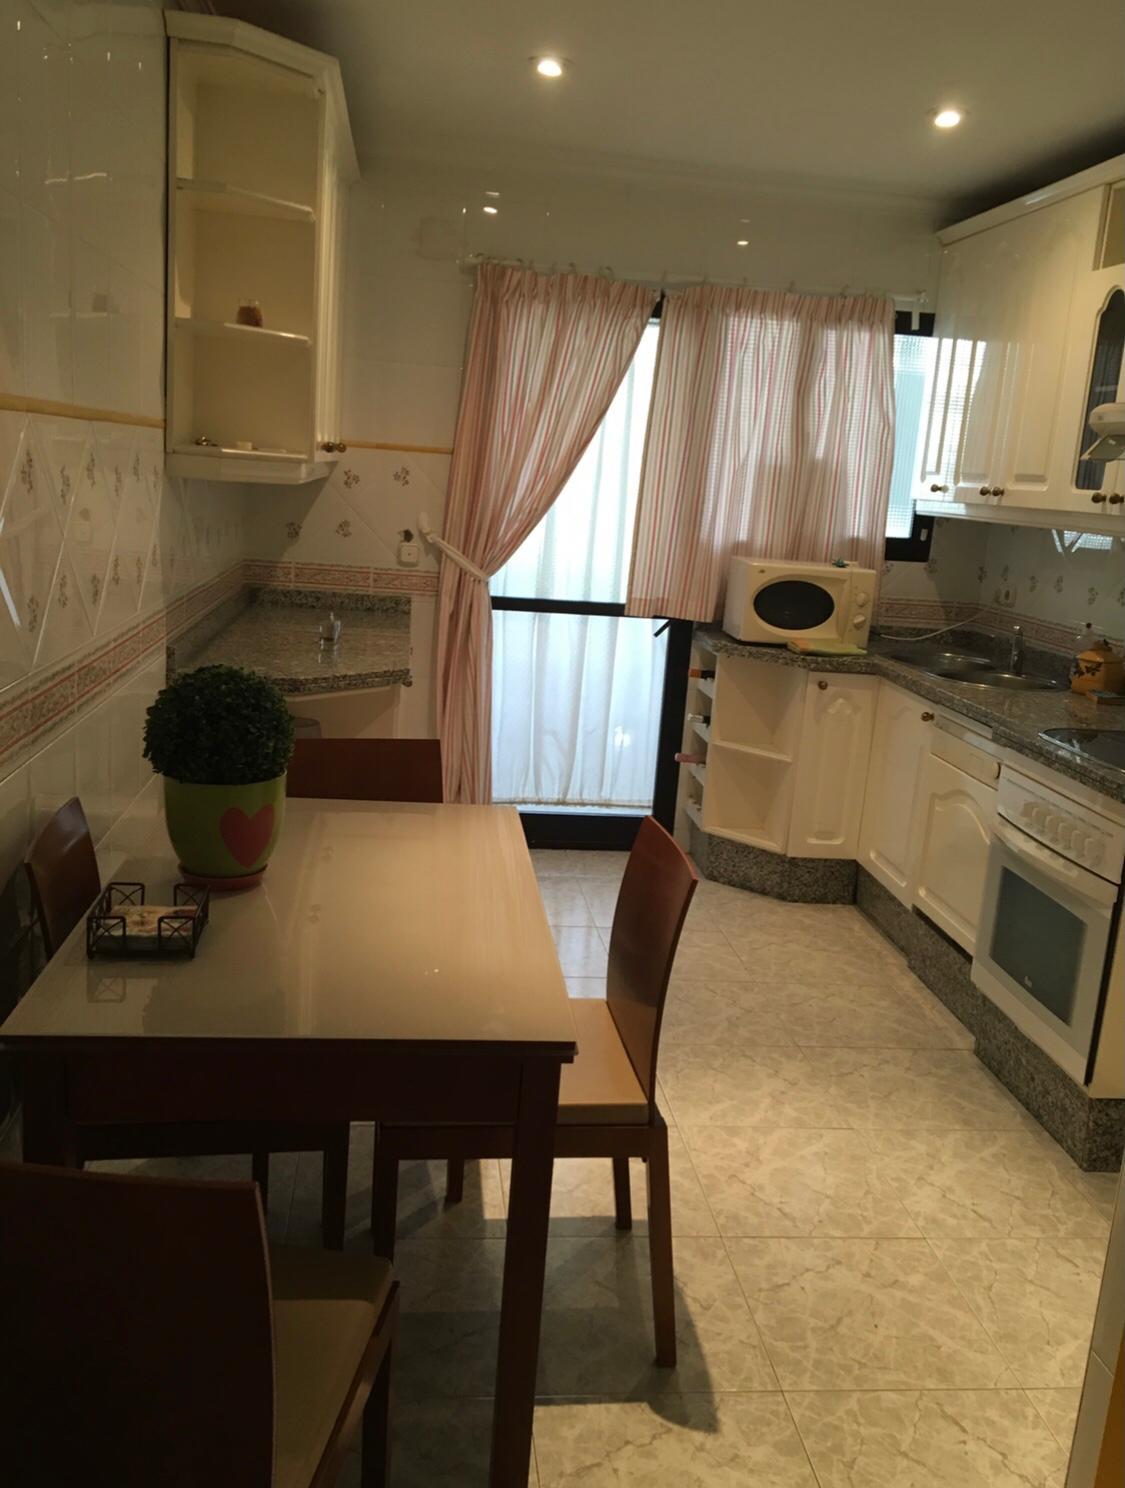 3 bedroom apartment for rent in Estepona on Avenida Andalusia - mibgroup.es